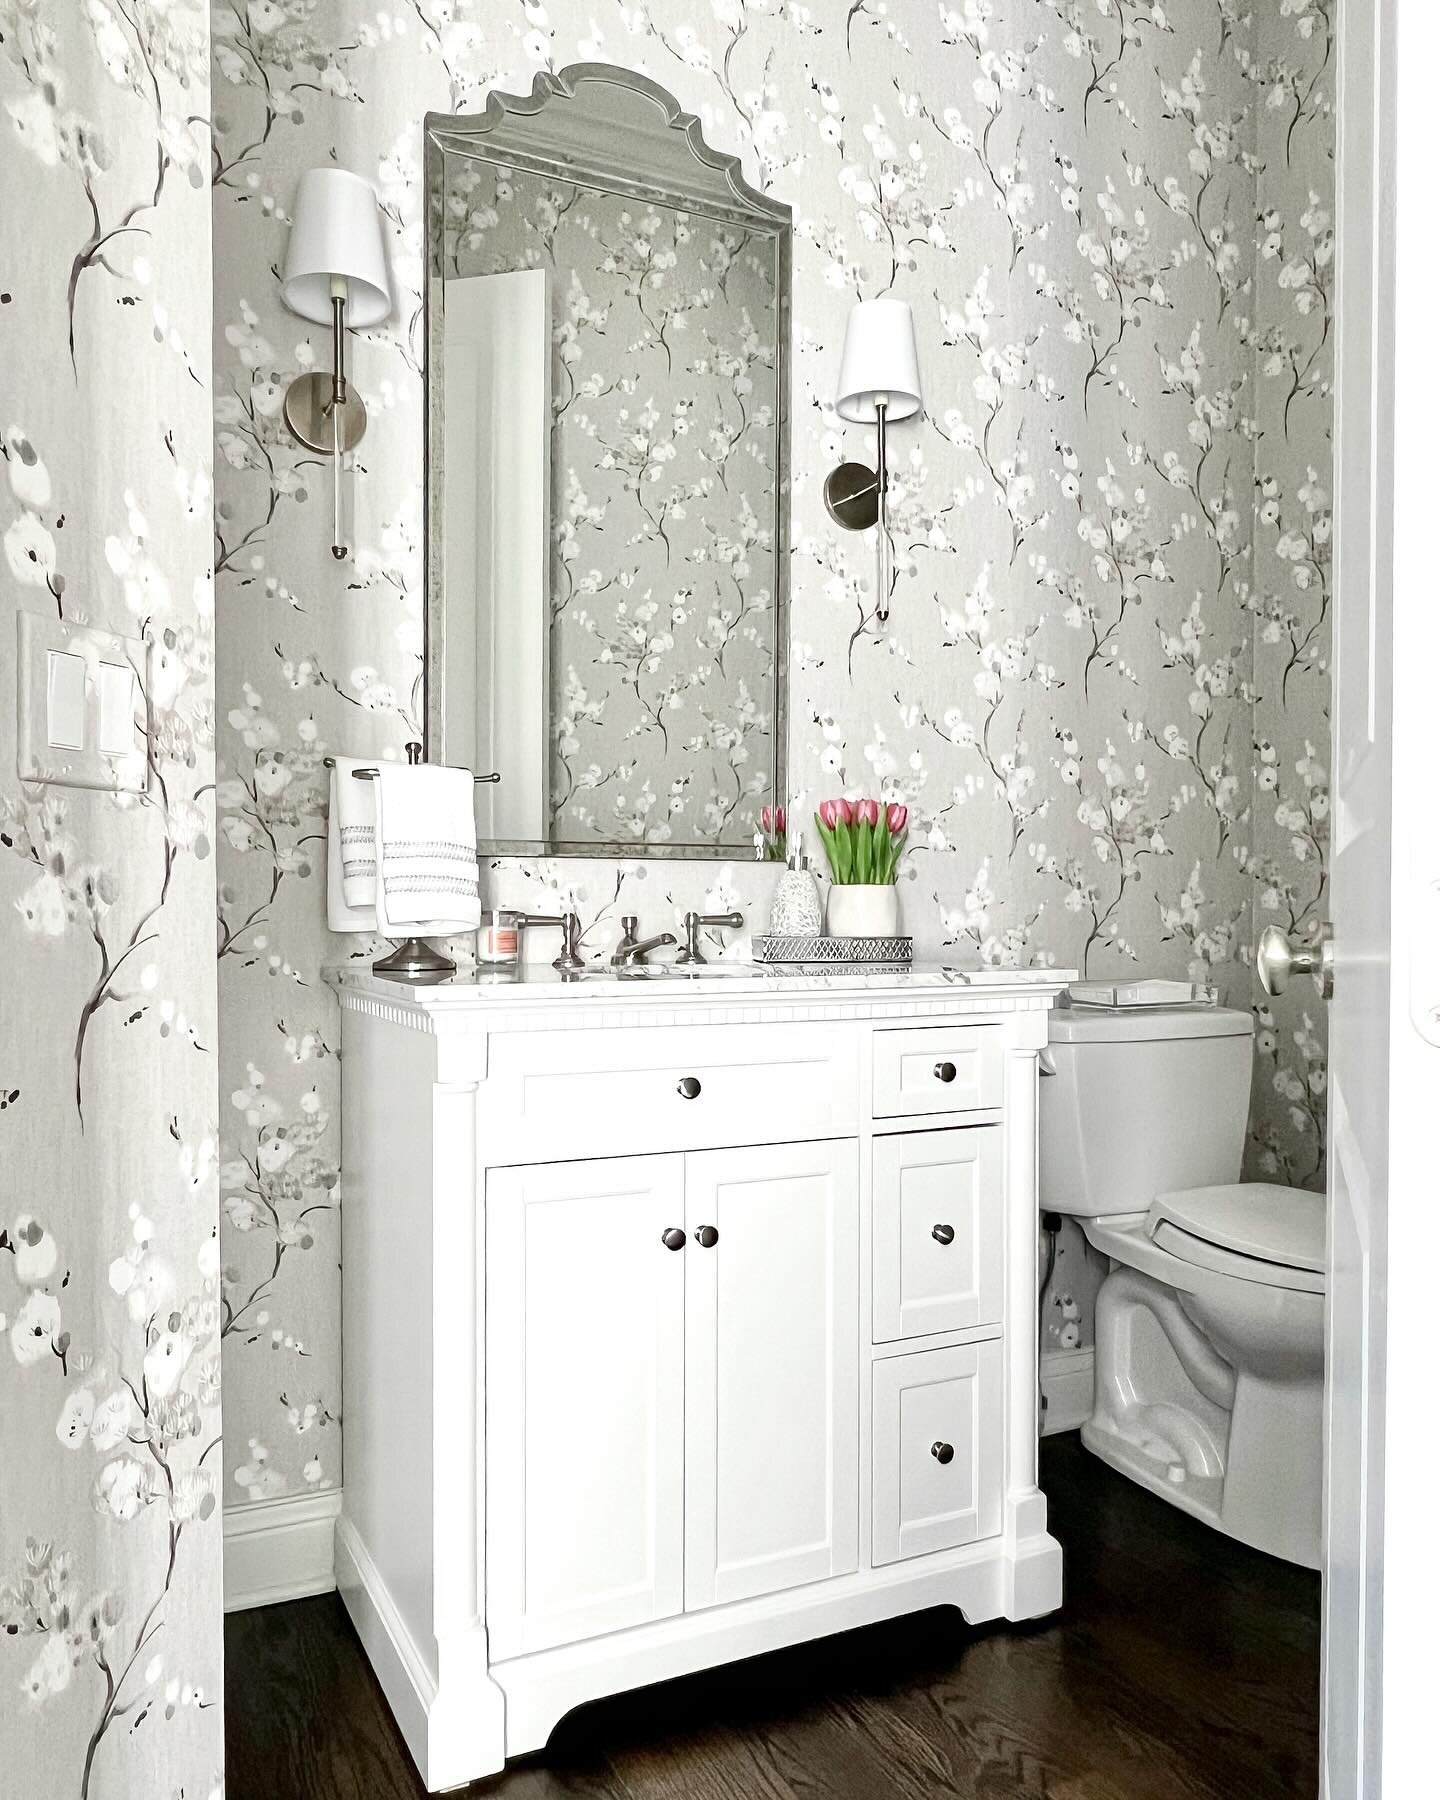 Spring is in the air! Swipe to see how we brought this powder room out of hibernation 🌷  #SDMilstoneMakeover @steffanie_danby_interiors 
.
.
.
#bathroomsofinstagram #bathroomdecor #bathroommakeover #wallpaper #fabricut #roommakeover #beforeandafterd